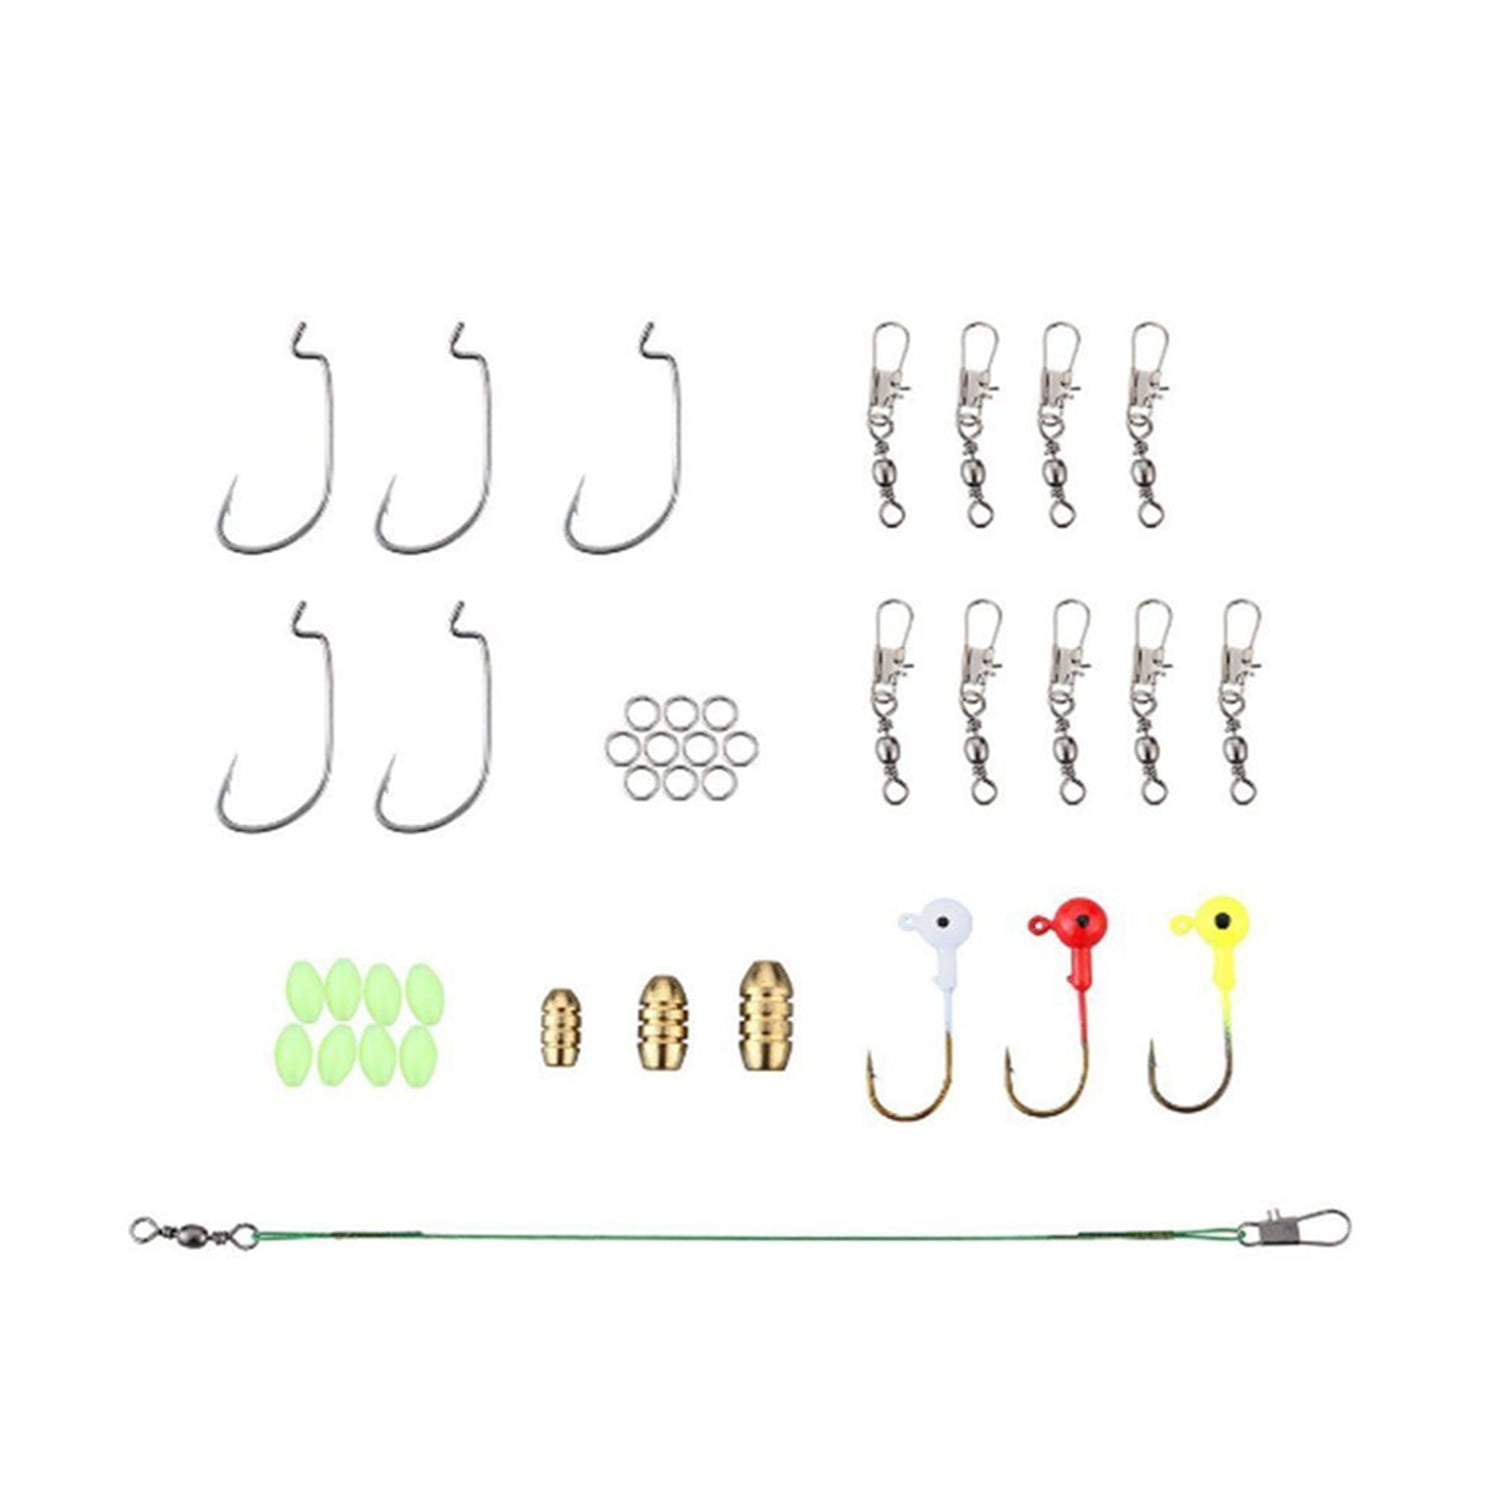  Aorace 20pcs Fishing Lures Kit Mixed Including Minnow Popper  Crank and Plastic Soft Lures Frog Lures for Saltwater Freshwater Trout Bass  Salmon Fishing : Sports & Outdoors